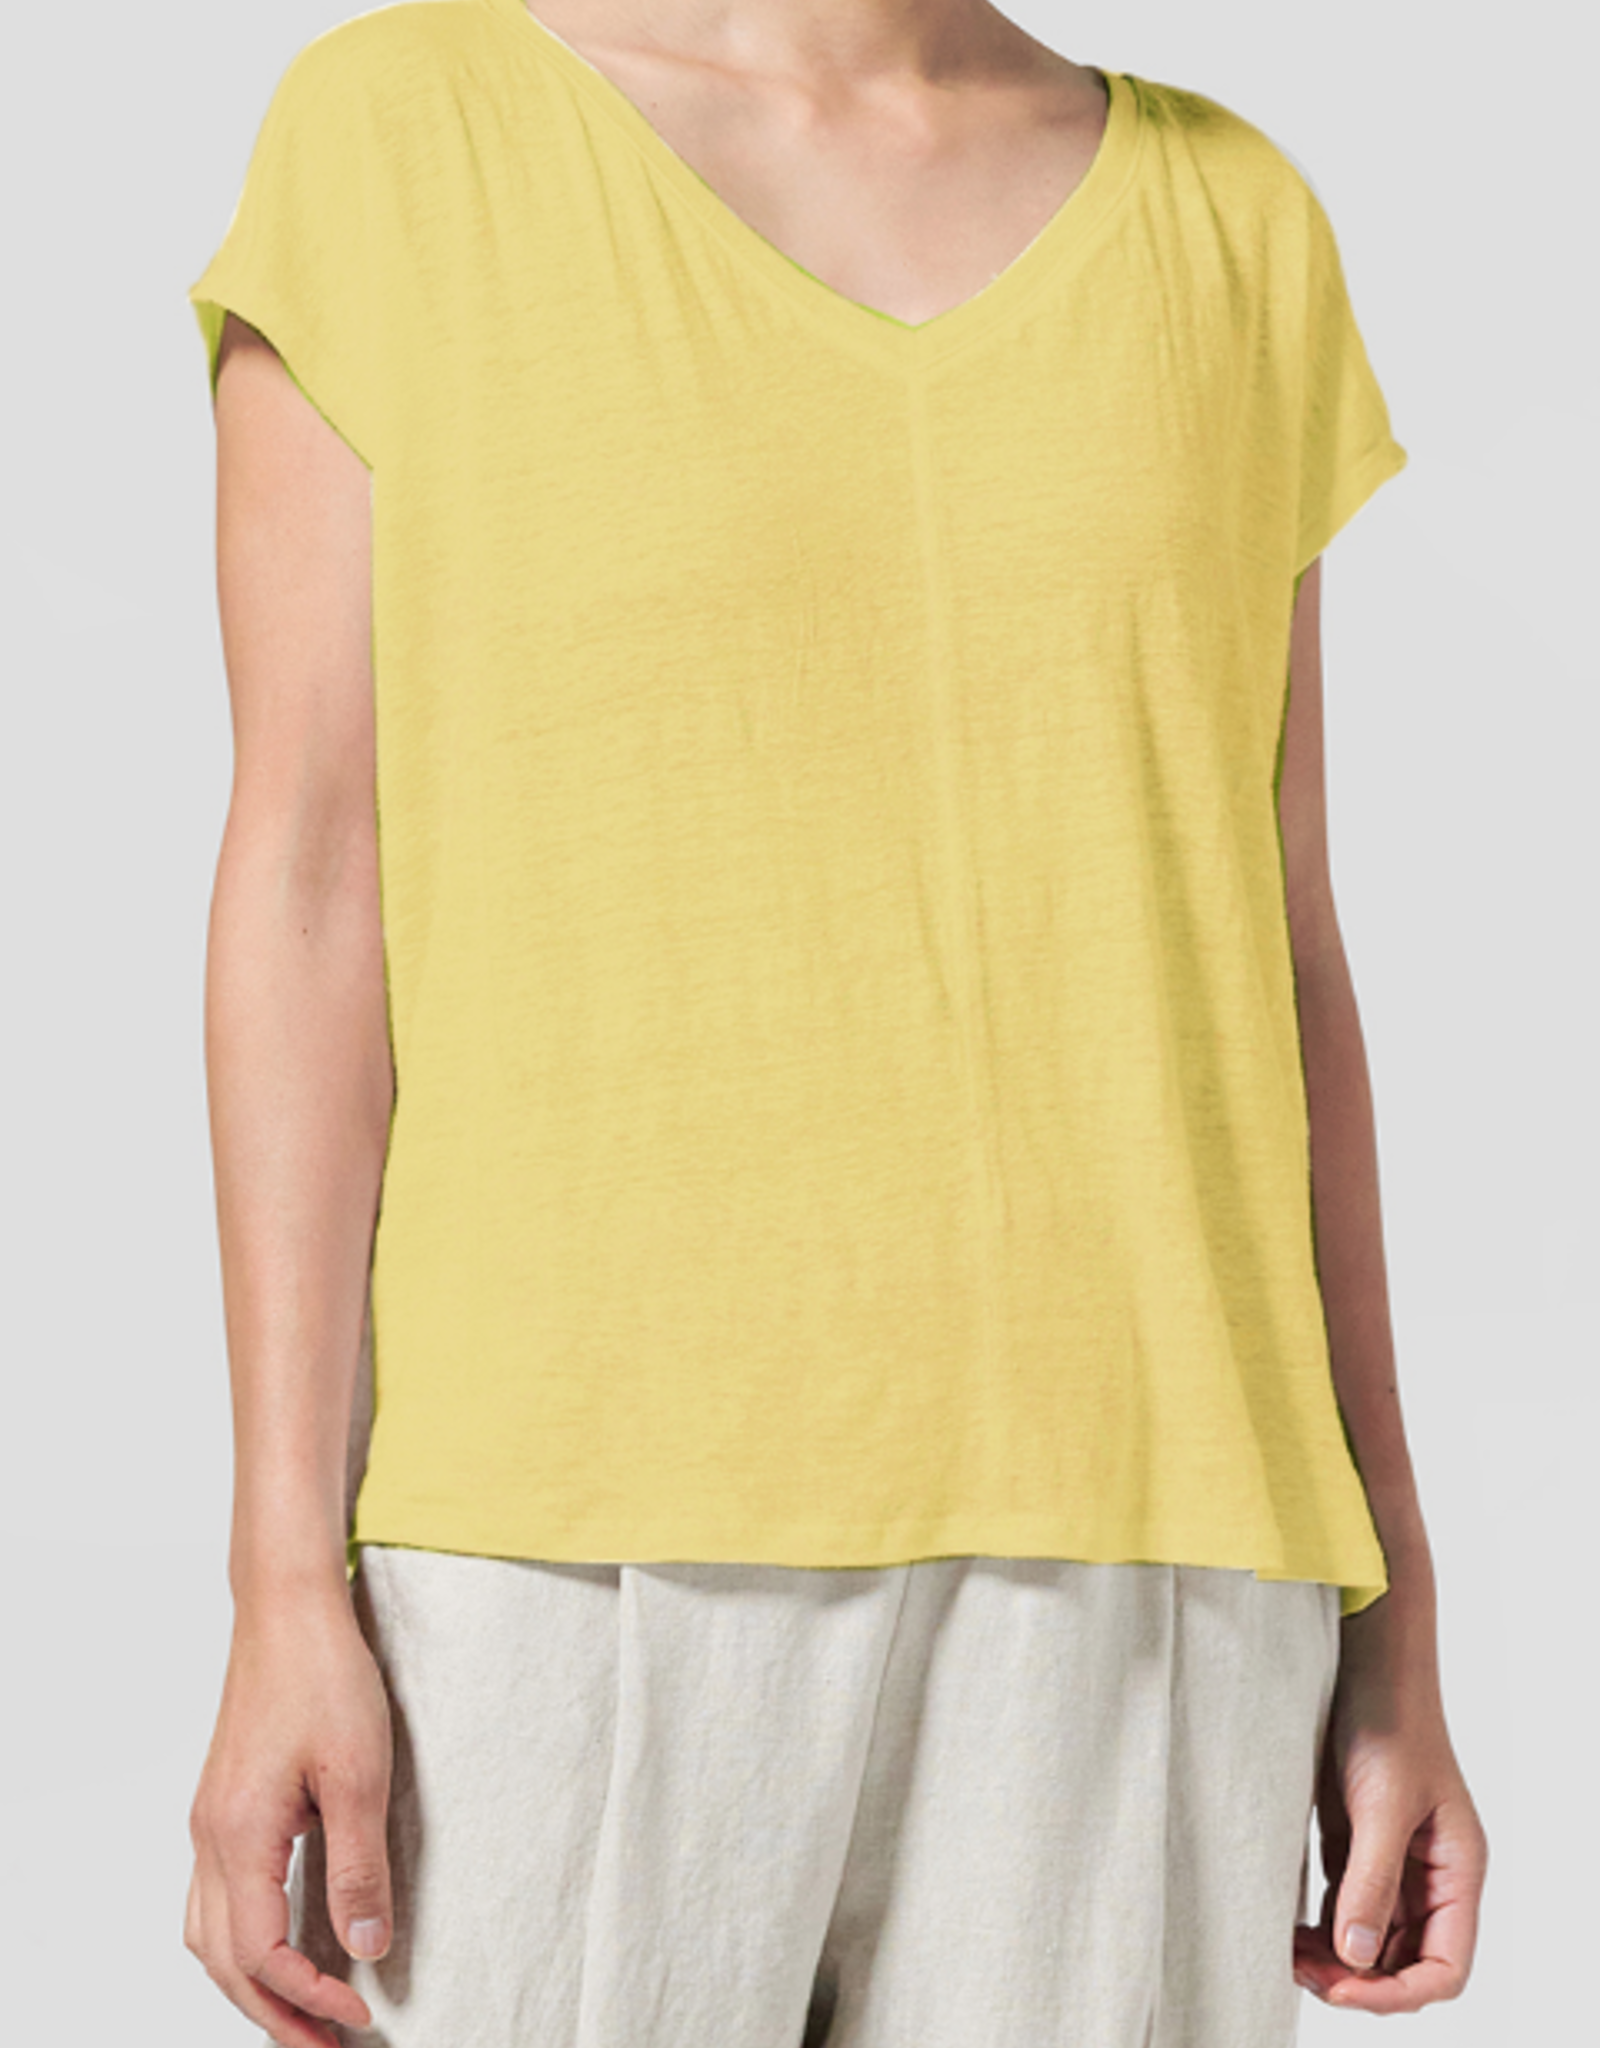 EILEEN FISHER V NECK SQUARE TEE